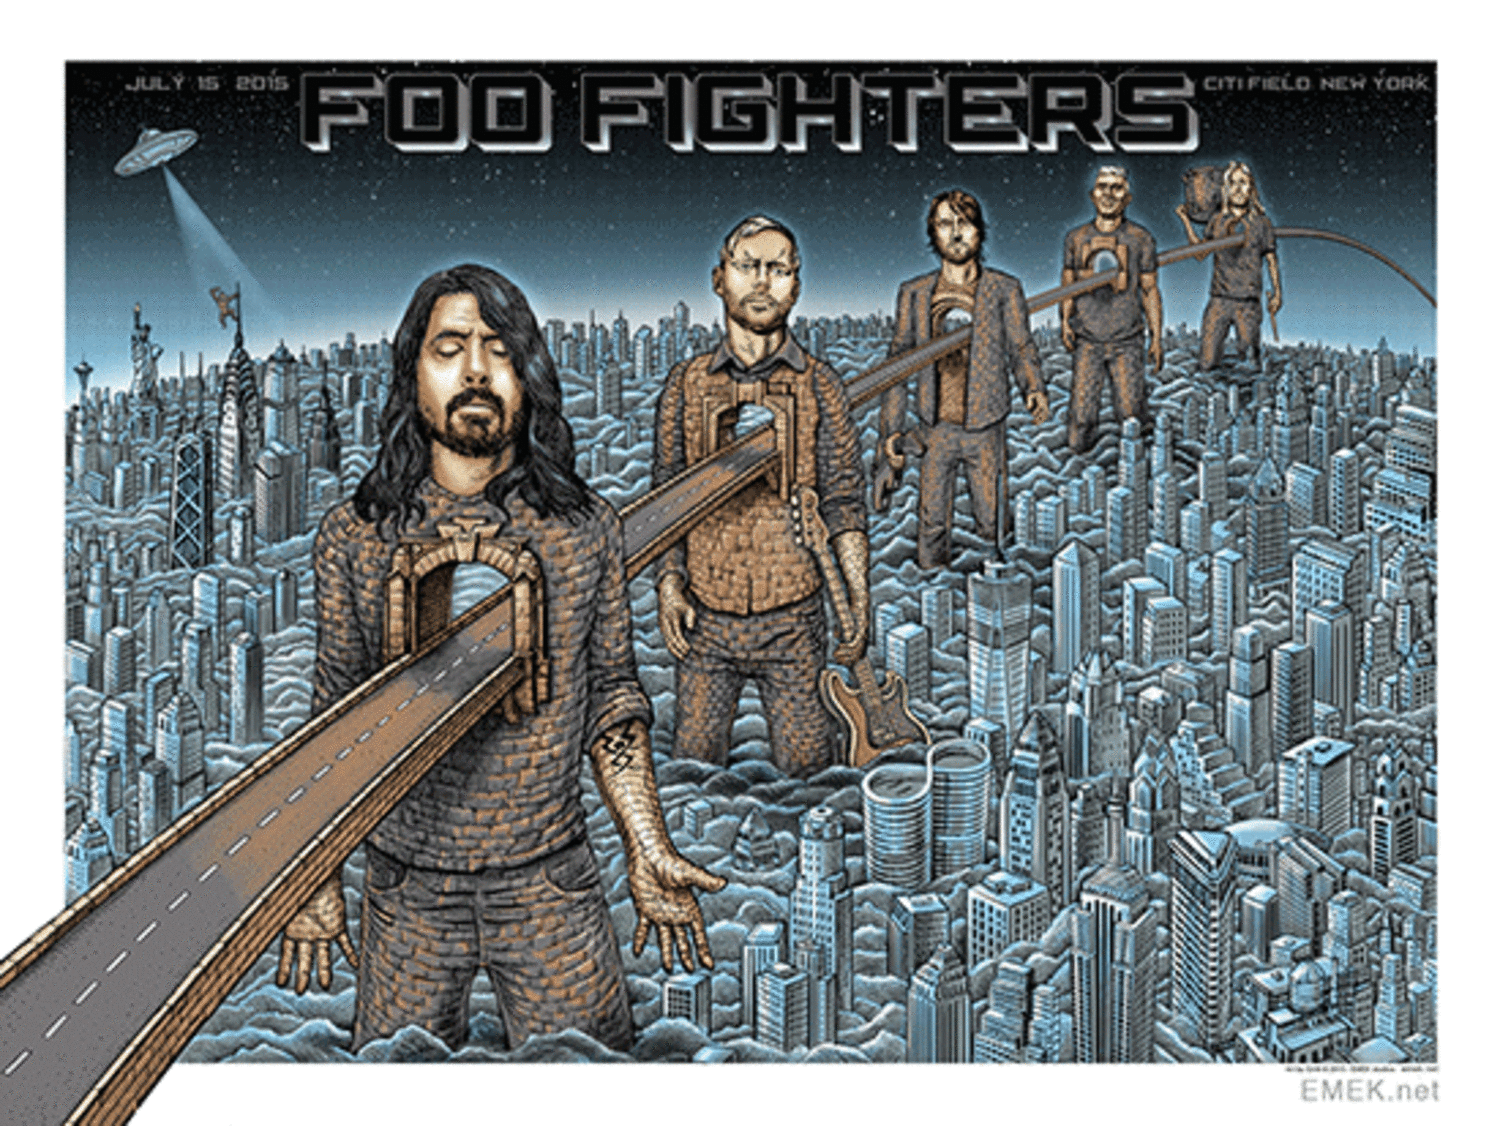 EMEK 2015 Foo Fighters “NYC Sonic Highway” Limited Edition Concert Poster